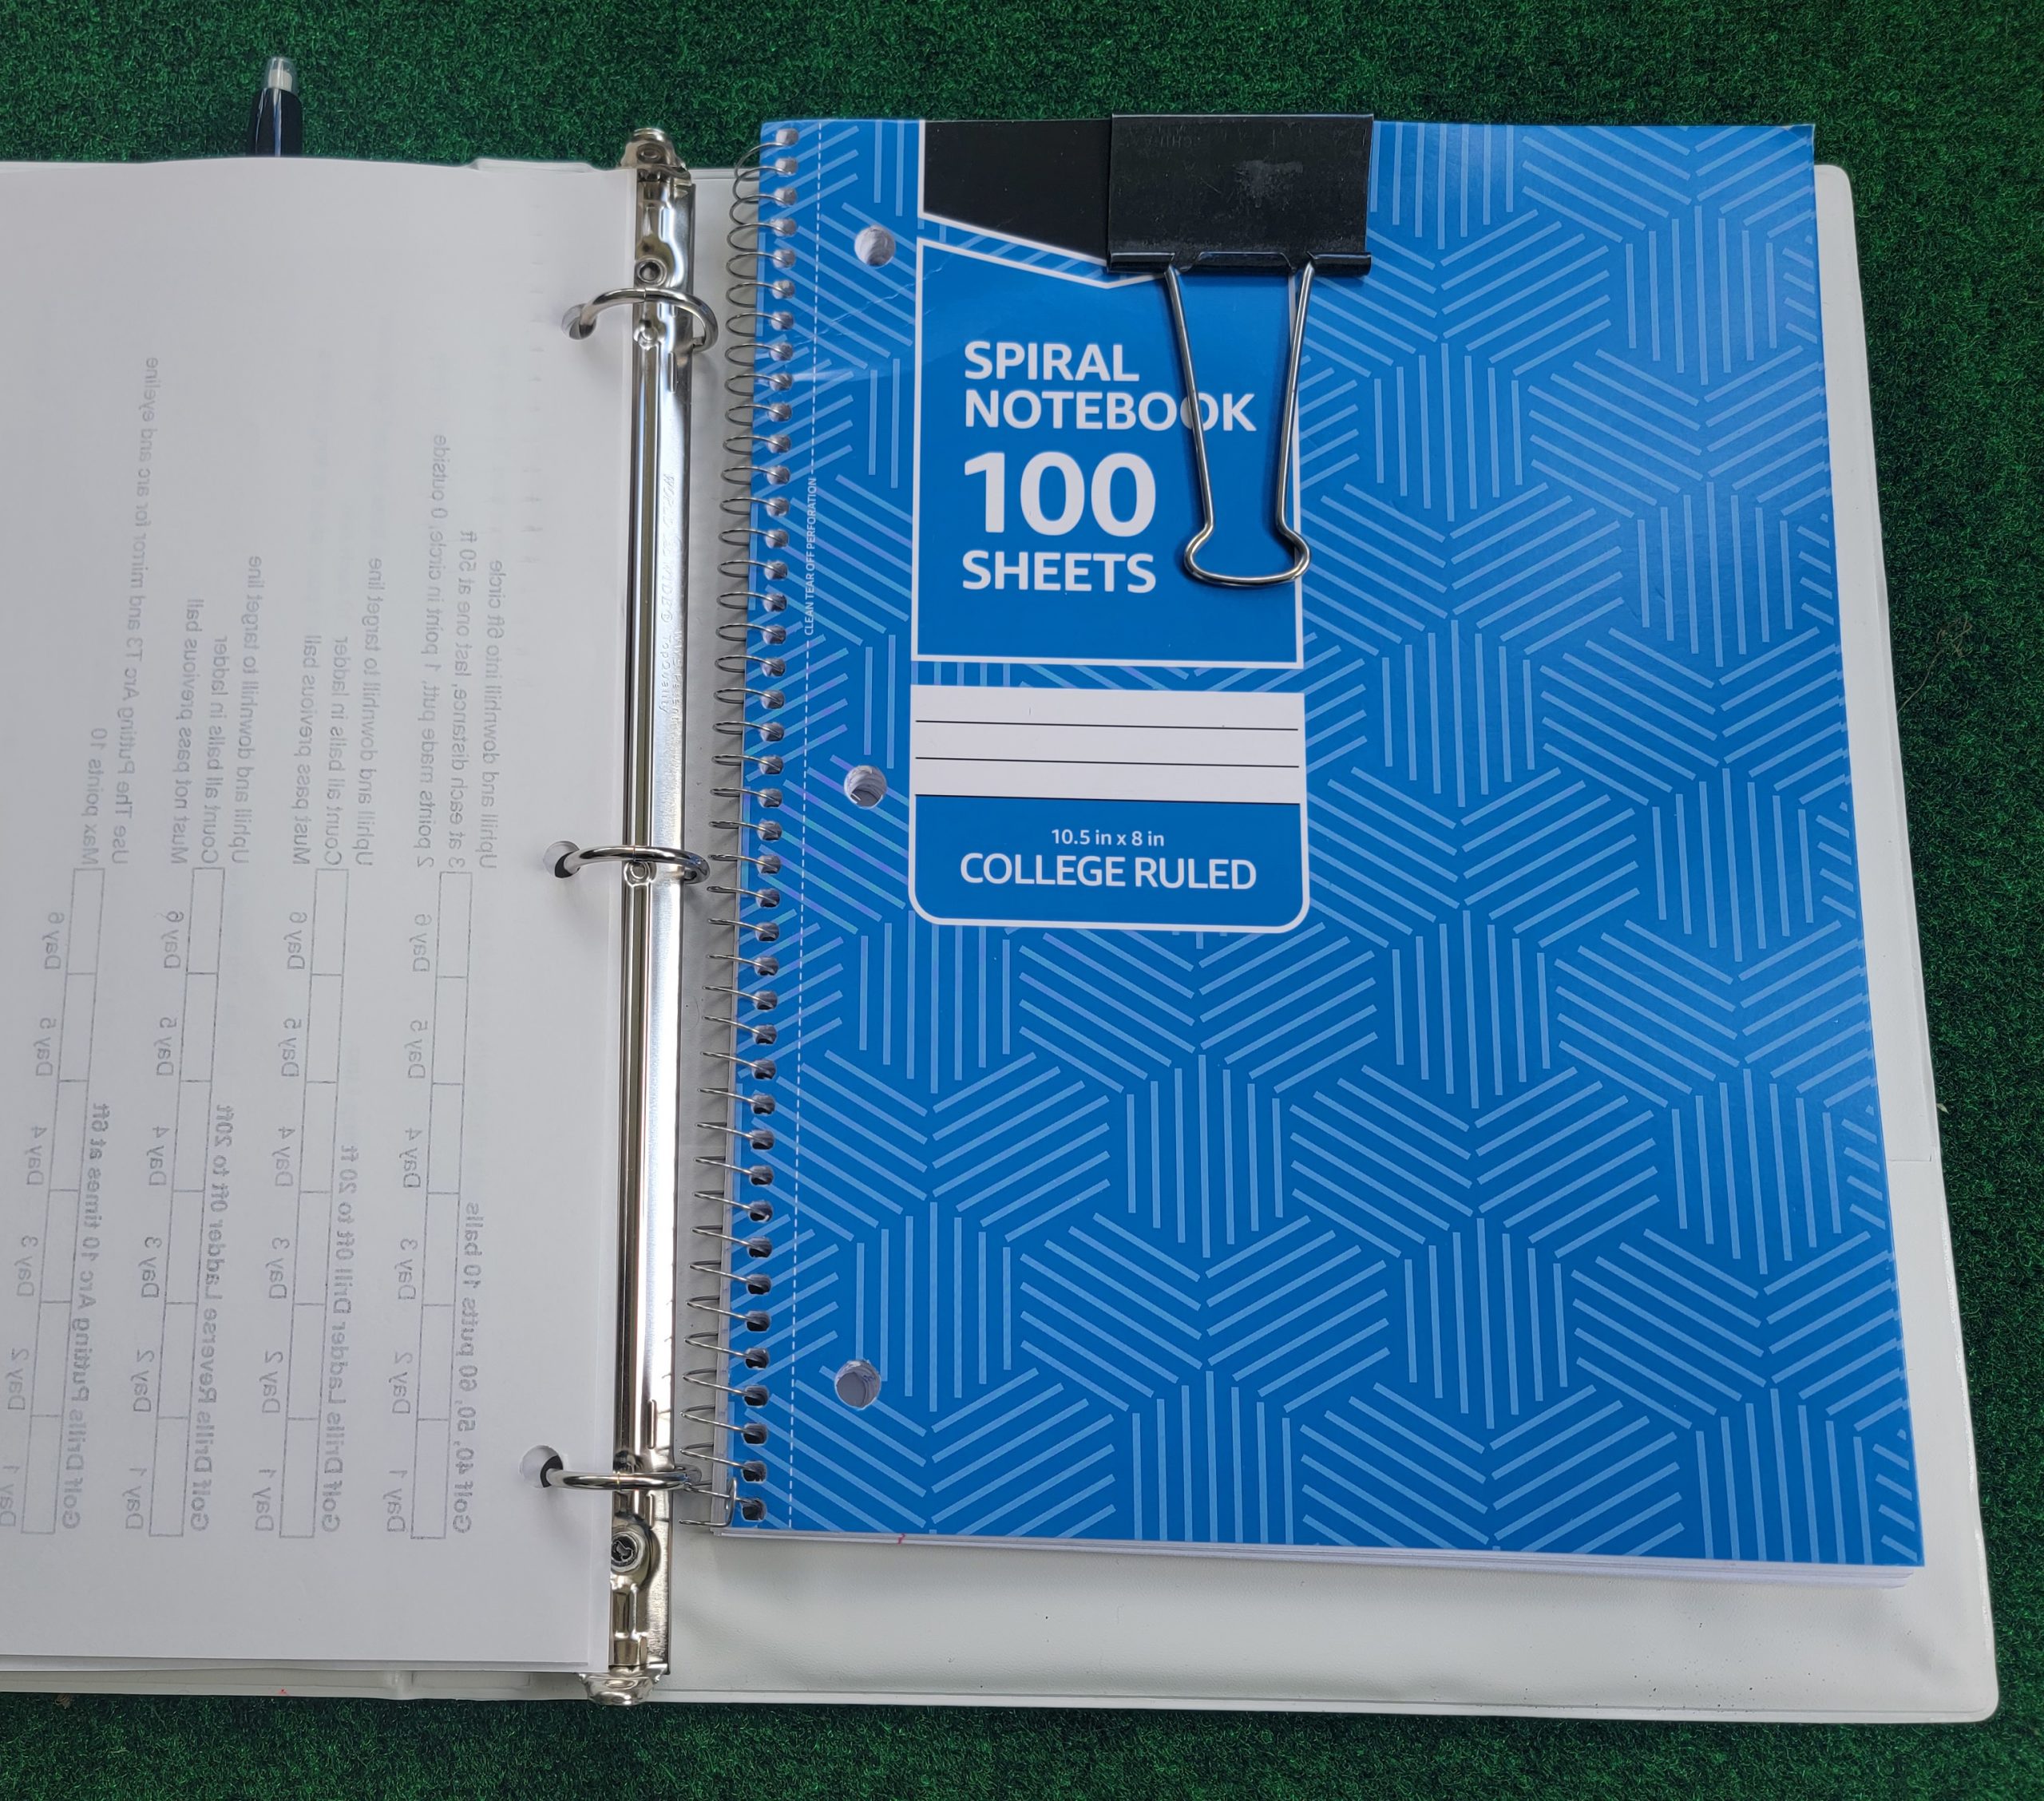 Old Duffer Golf image of a notebook for golf shots